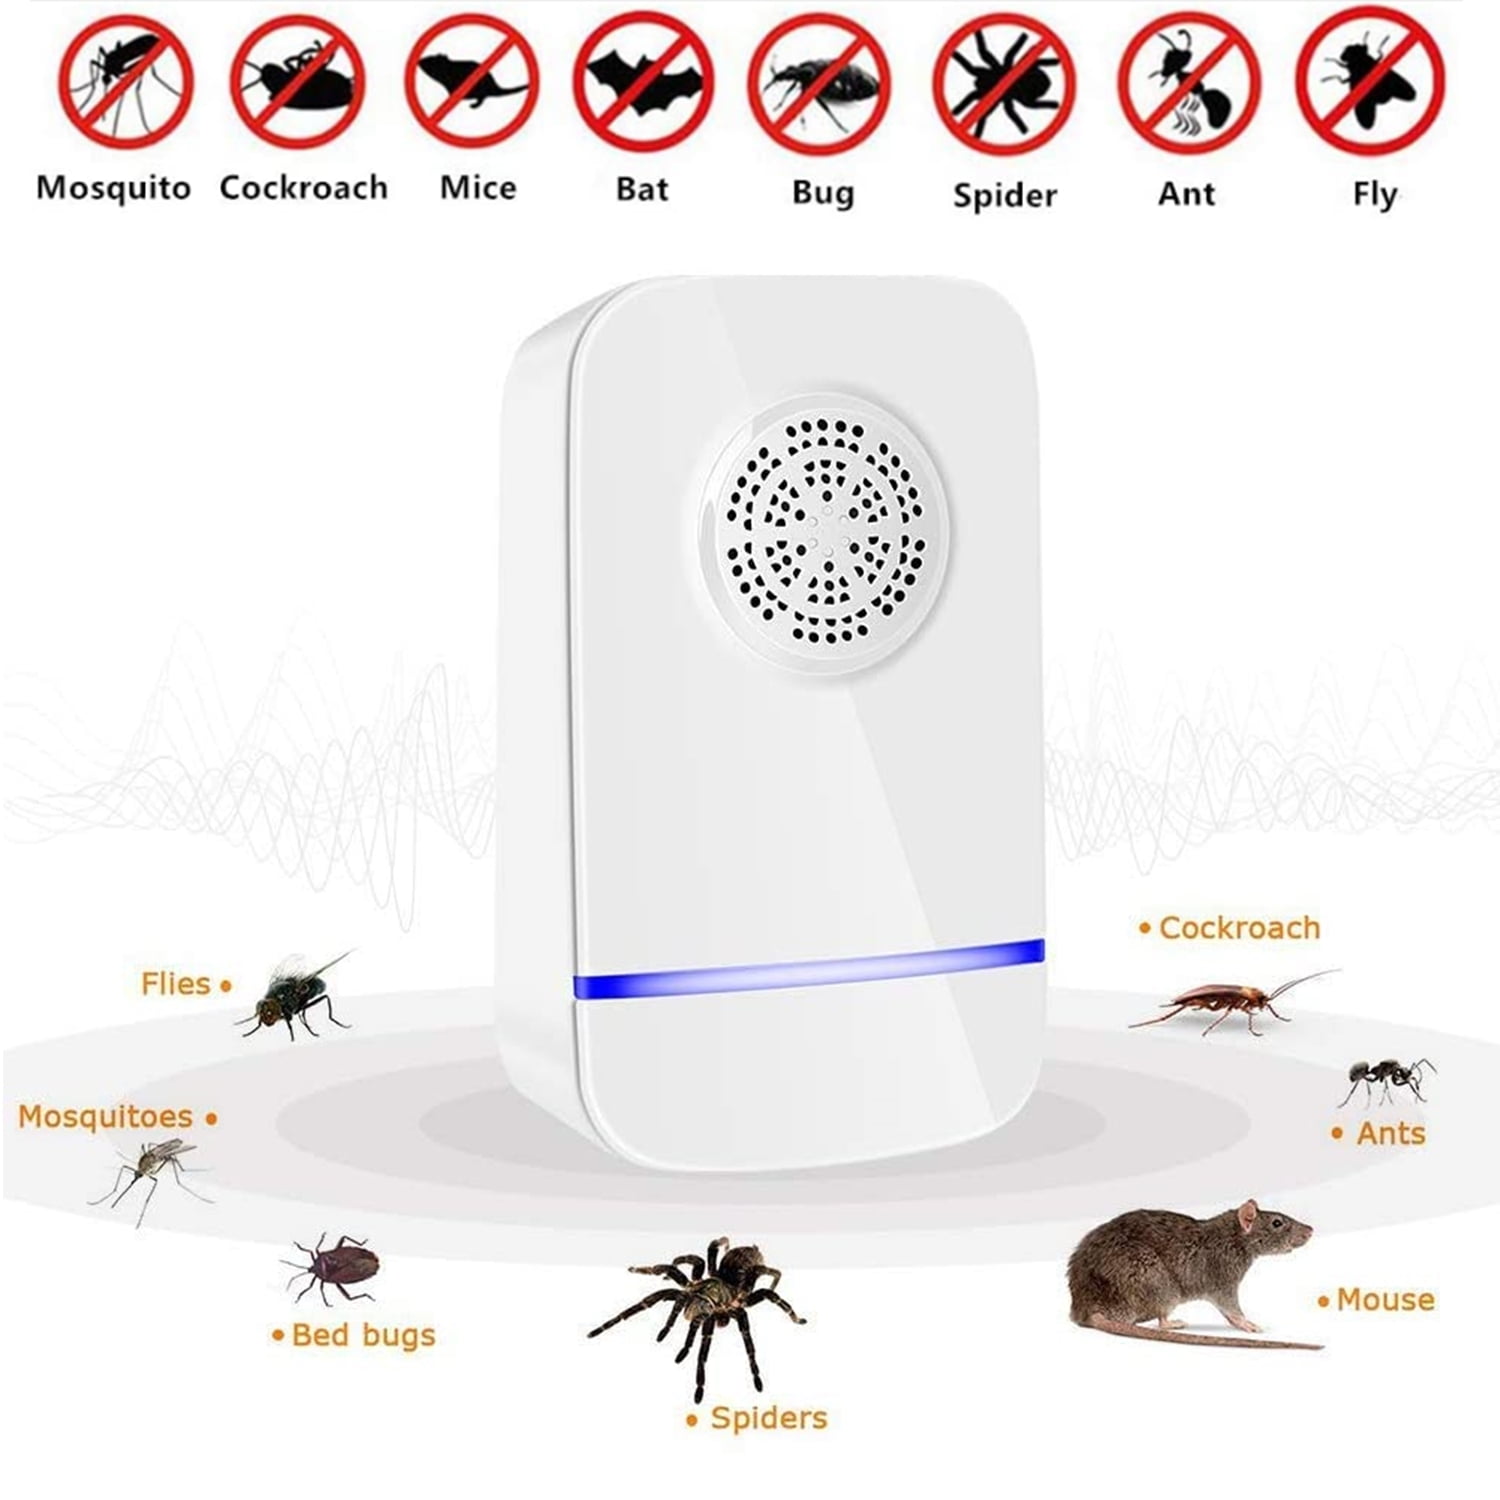 Rats Ultrasonic Mosquito Pest Repellent 2019 Rodents Professional Home Control Plug in Electronic Repeller Fruit Flies and More - Repels Ants Fleas Roaches 4 Pack